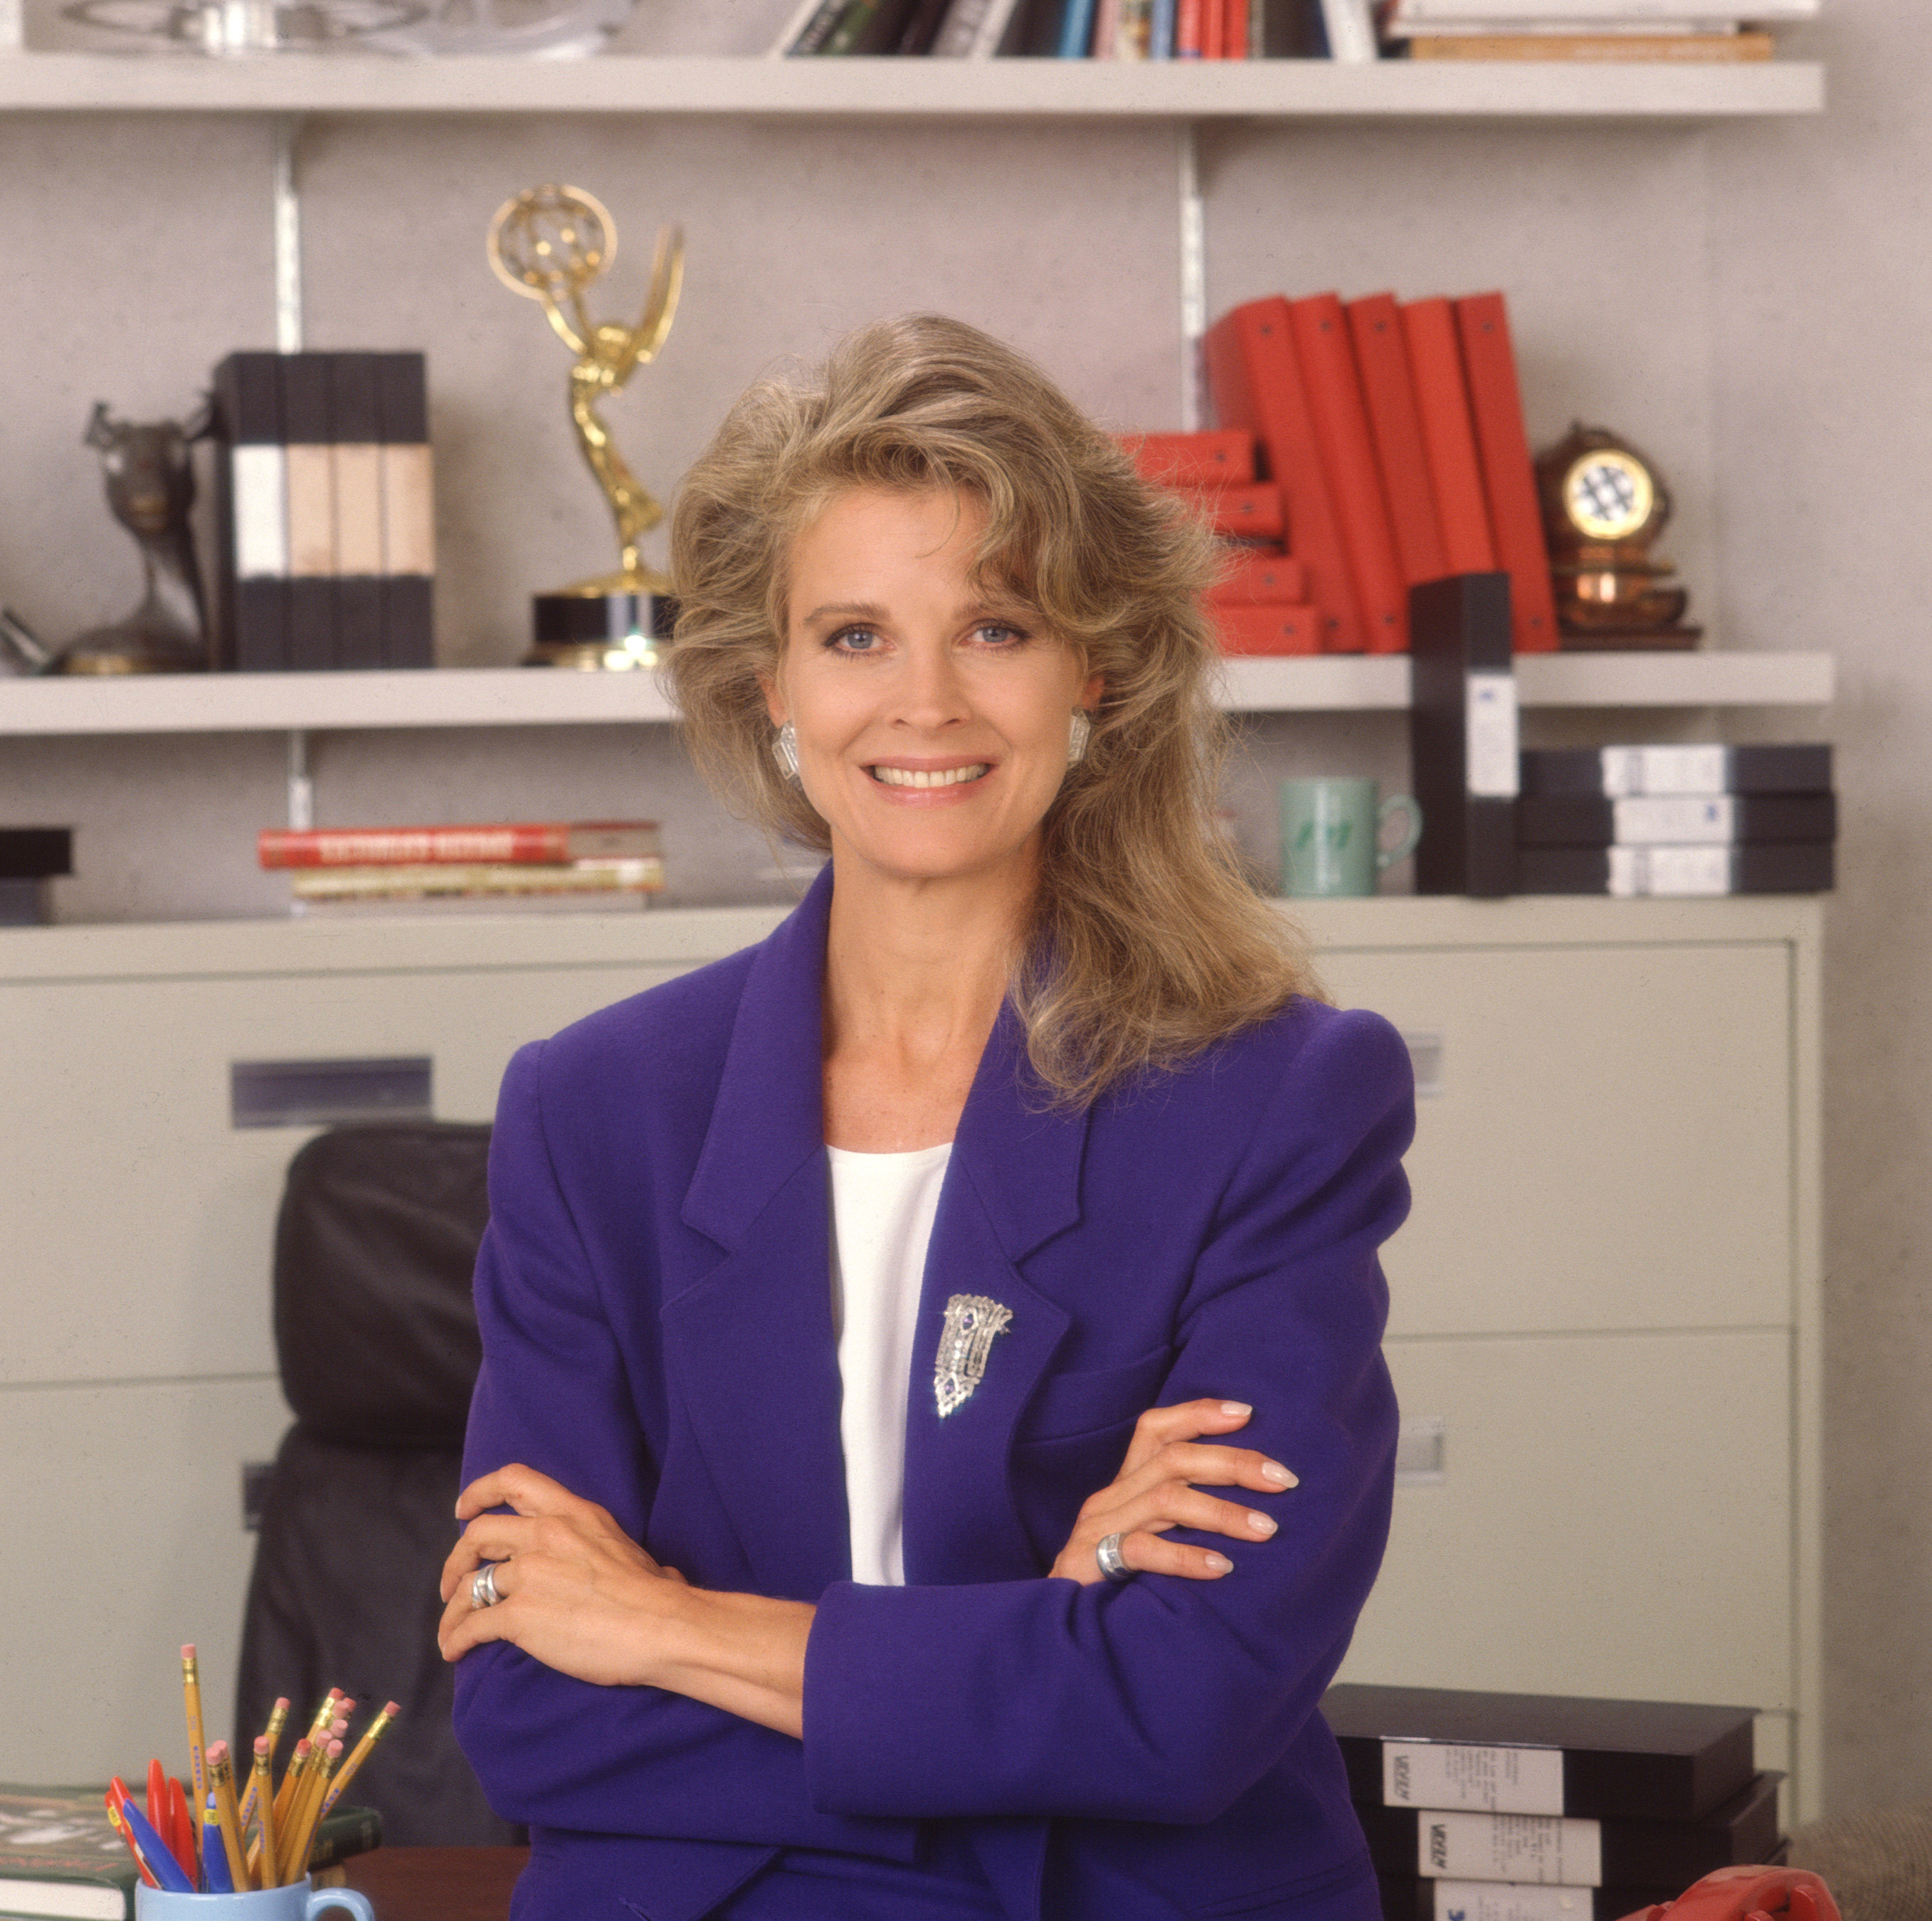 Candice Bergen poses as the investigative television journalist Murphy Brown, from the CBS sitcom of the same name, California, 1990 | Source: Getty Images